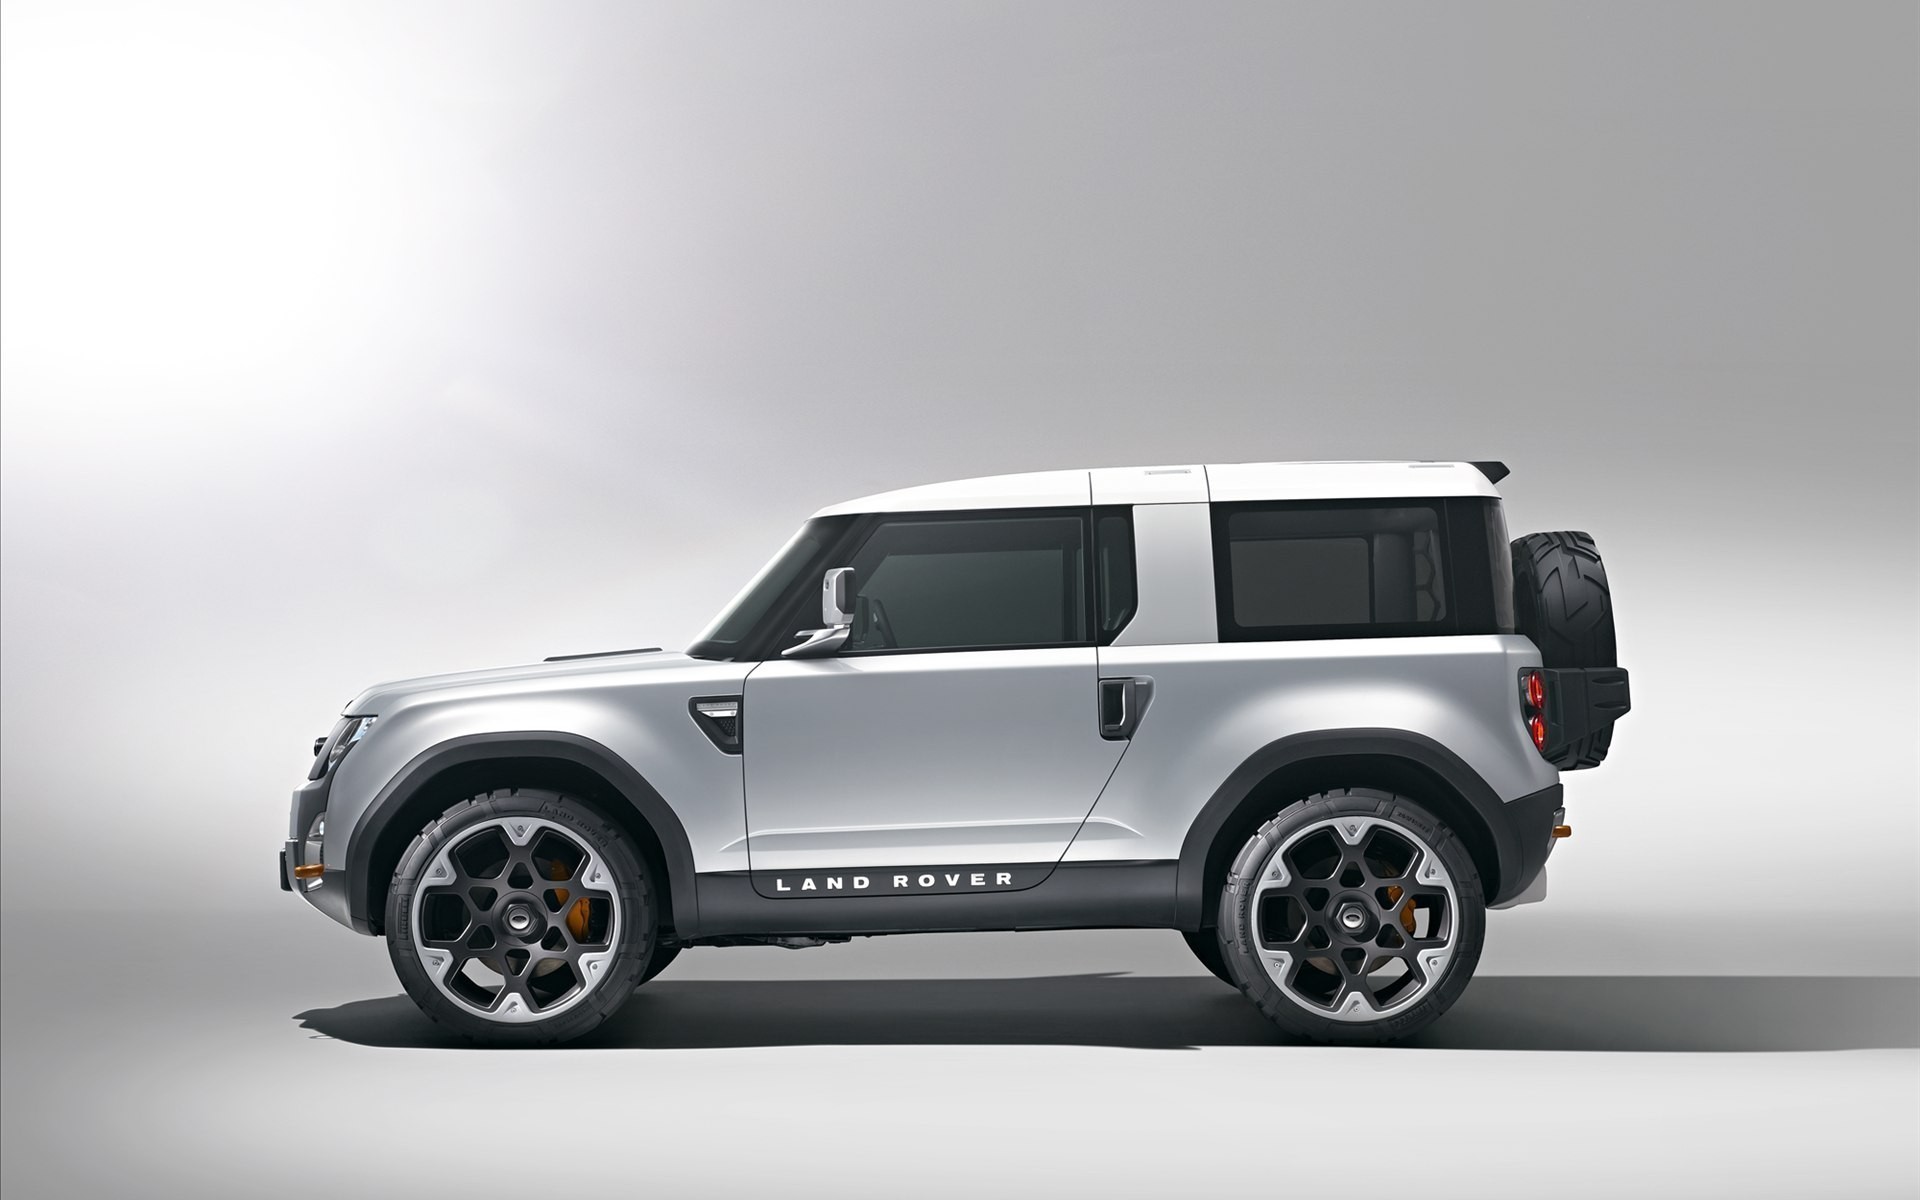 General 1920x1200 car silver cars Land Rover vehicle Land Rover DC100 concept cars side view British cars SUV offroad